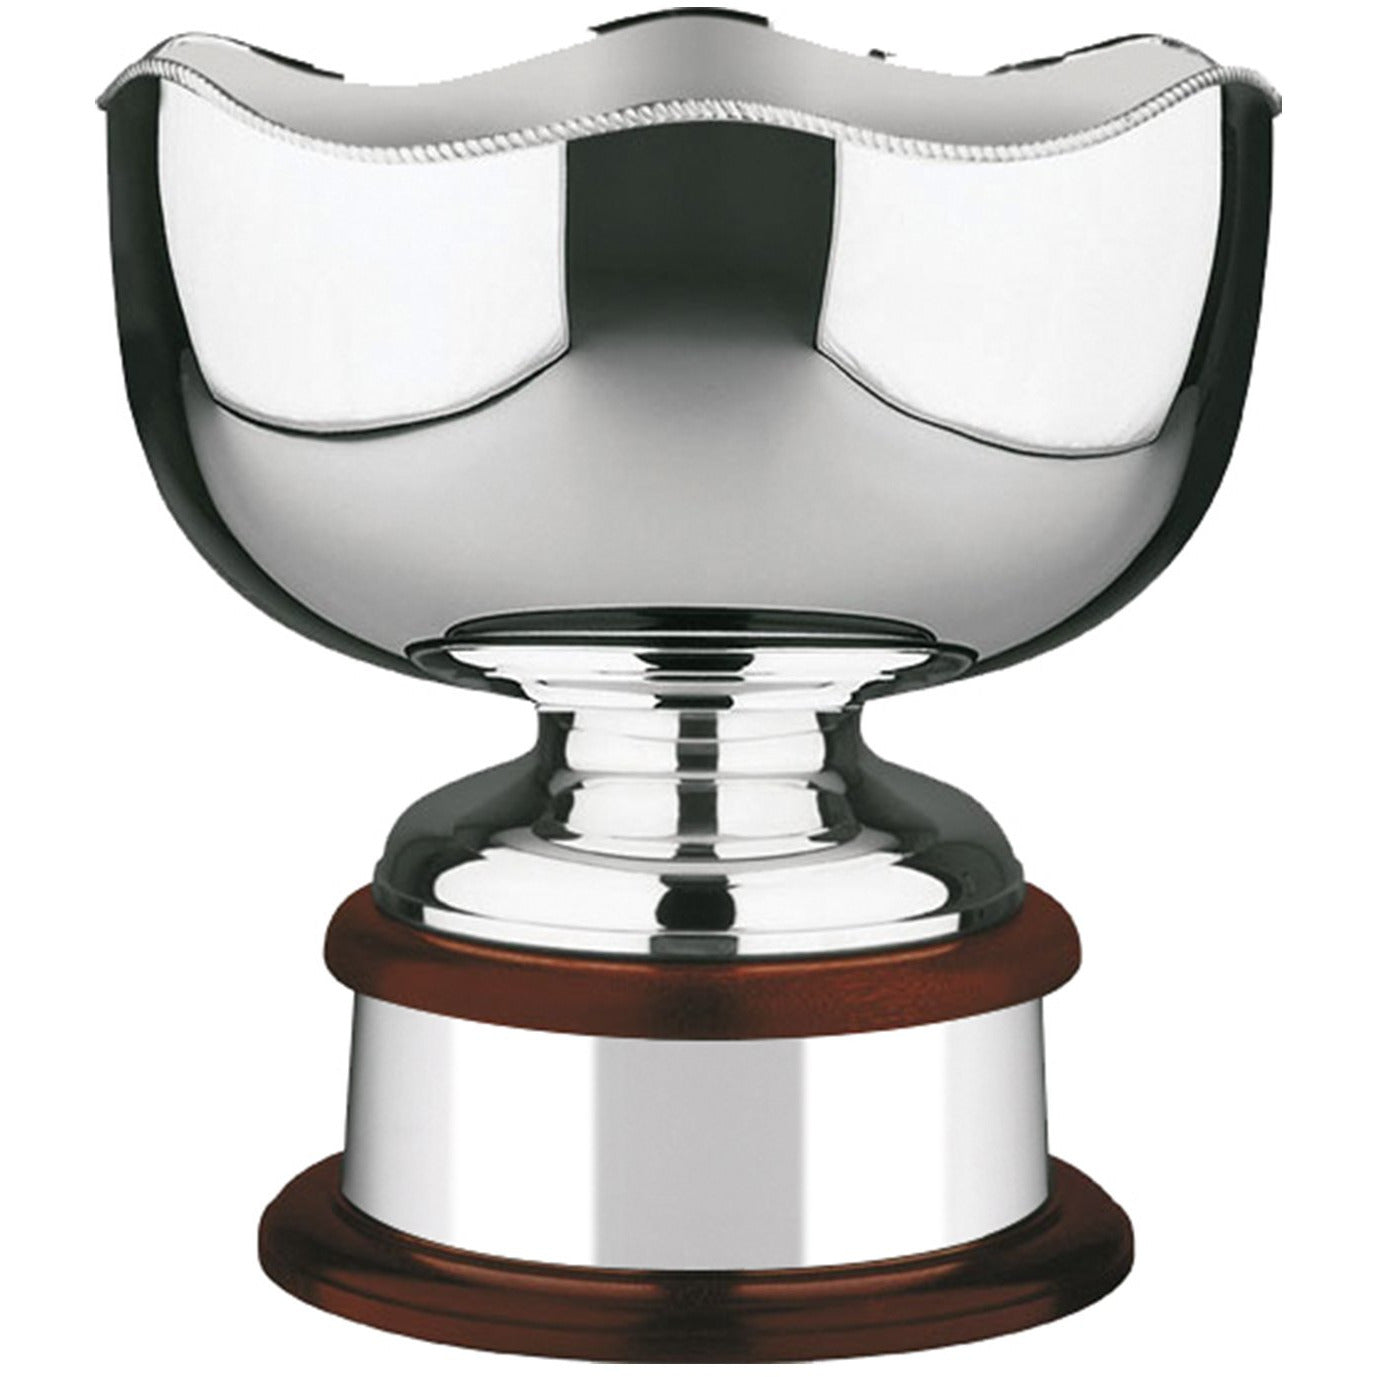 Silver Plated World Cup 'Wavy Edge' Gadroon Trophy Bowl